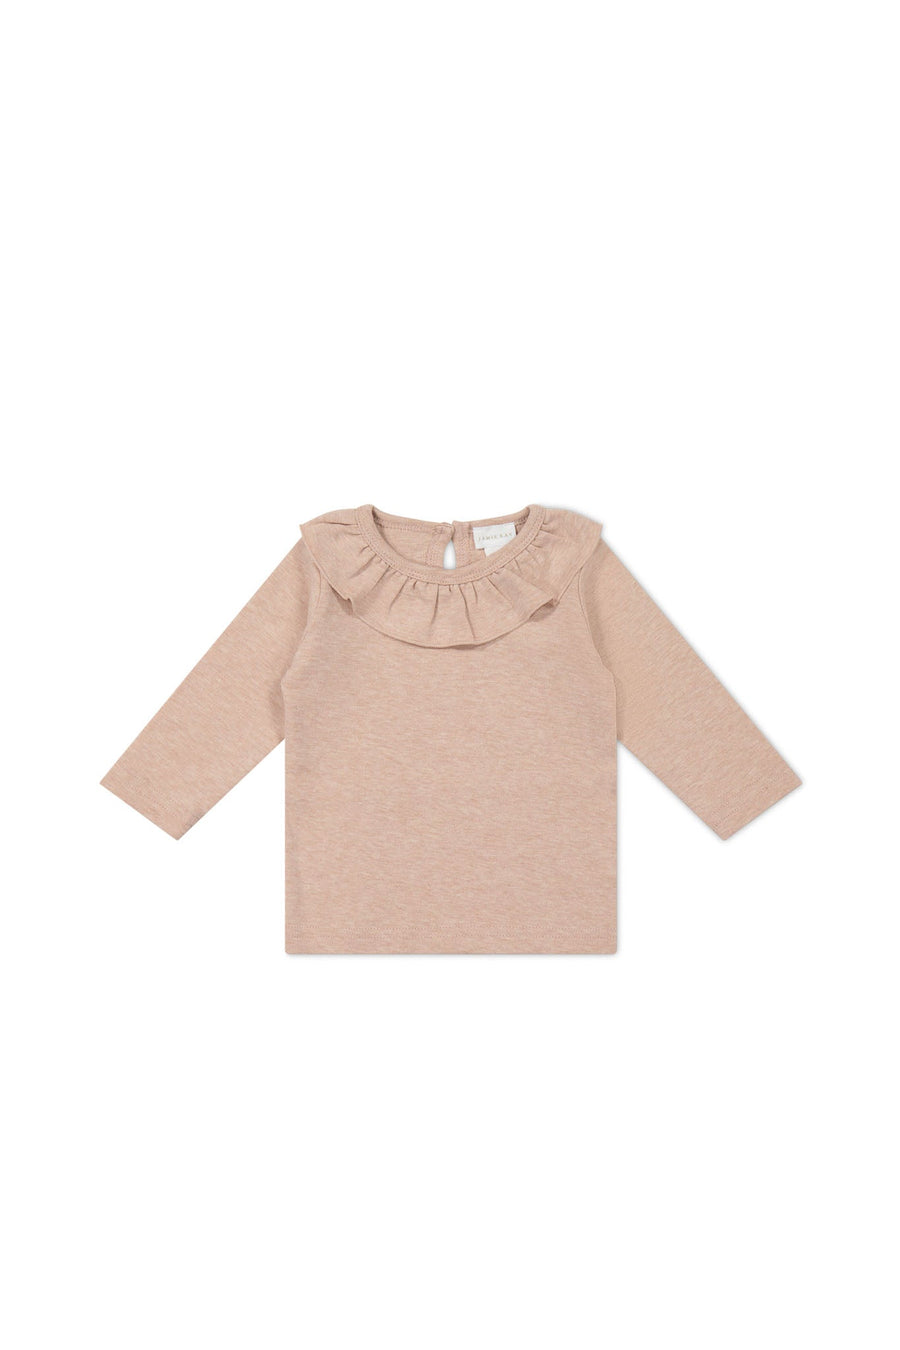 Pima Cotton Louise Top - Dusky Rose Marle Childrens Top from Jamie Kay USA